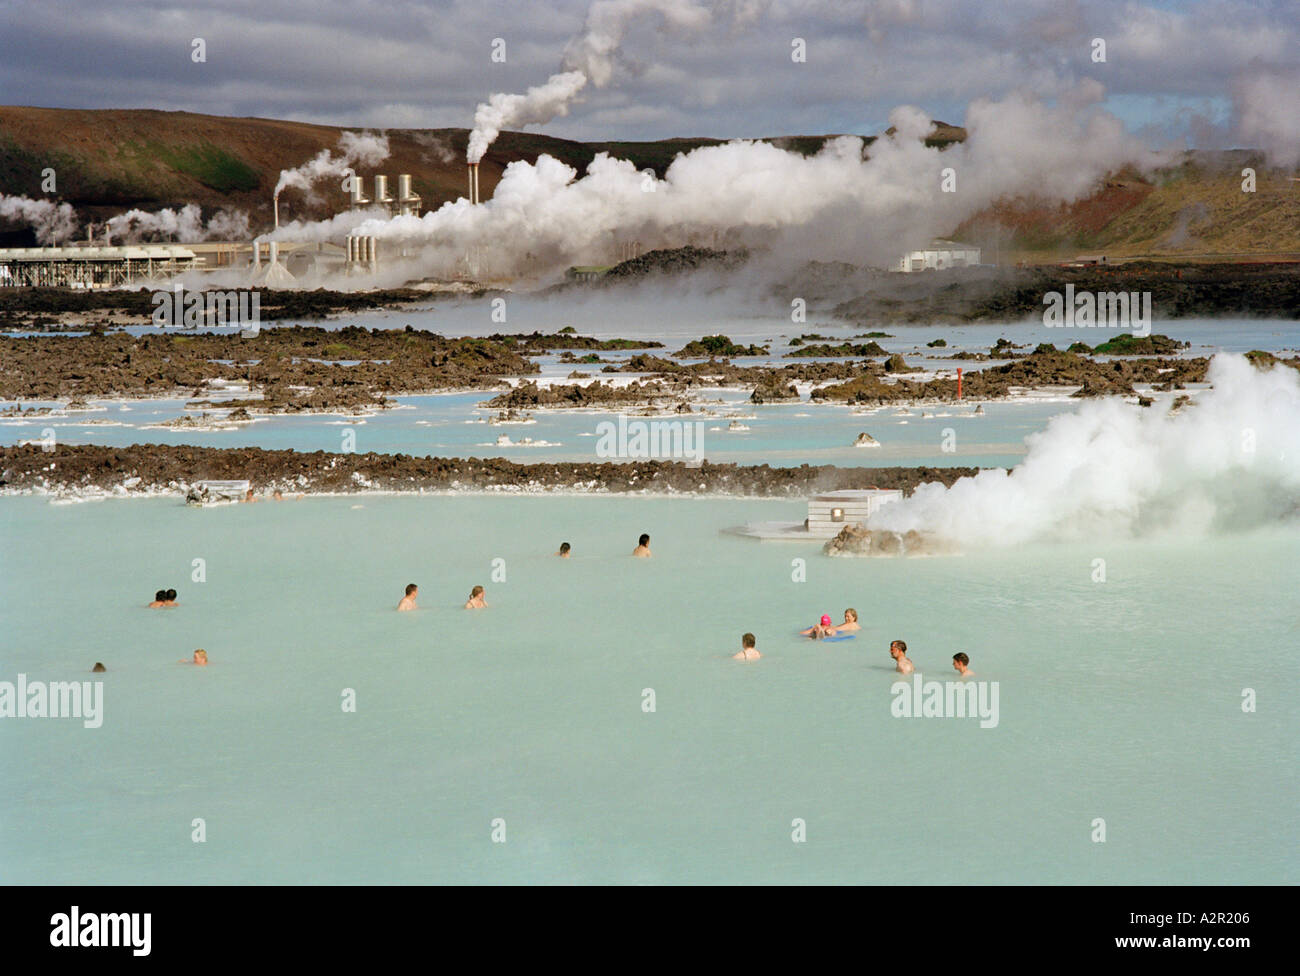 Bathers in the Hot Springs of the Blue Lagoon on the outskirts of Reykjavik, Iceland Stock Photo